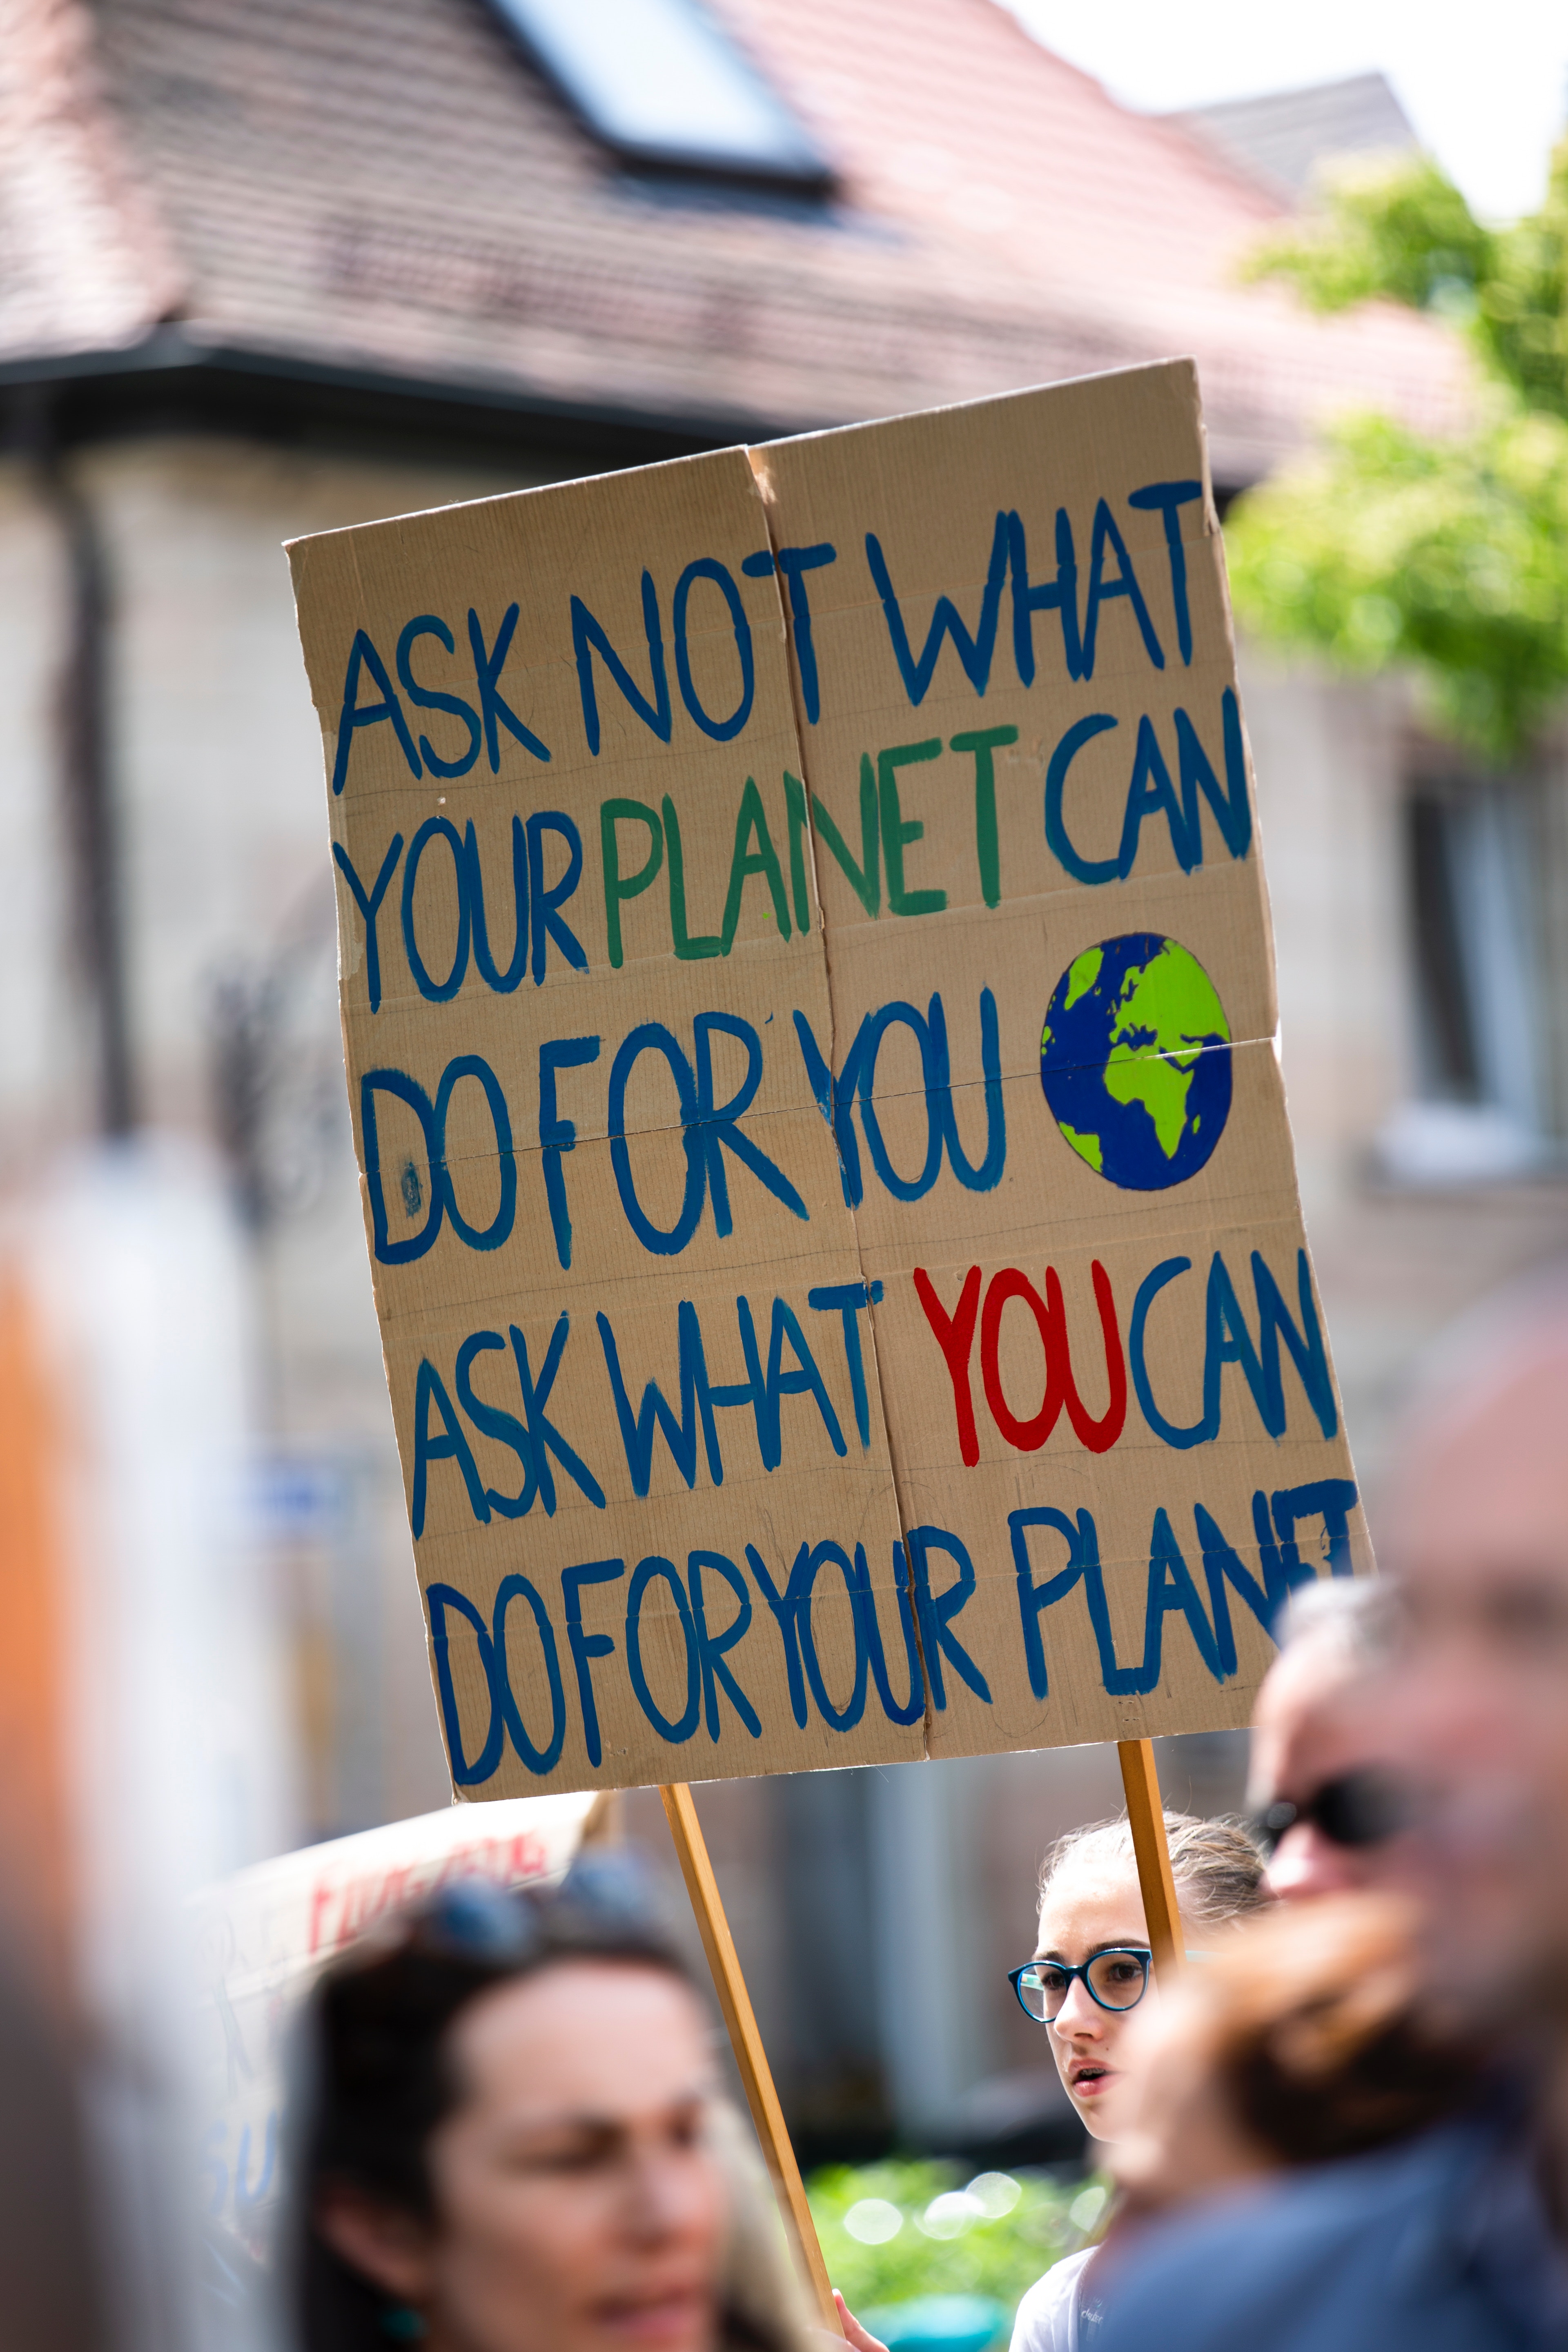 What Can You Do For Your Planet?